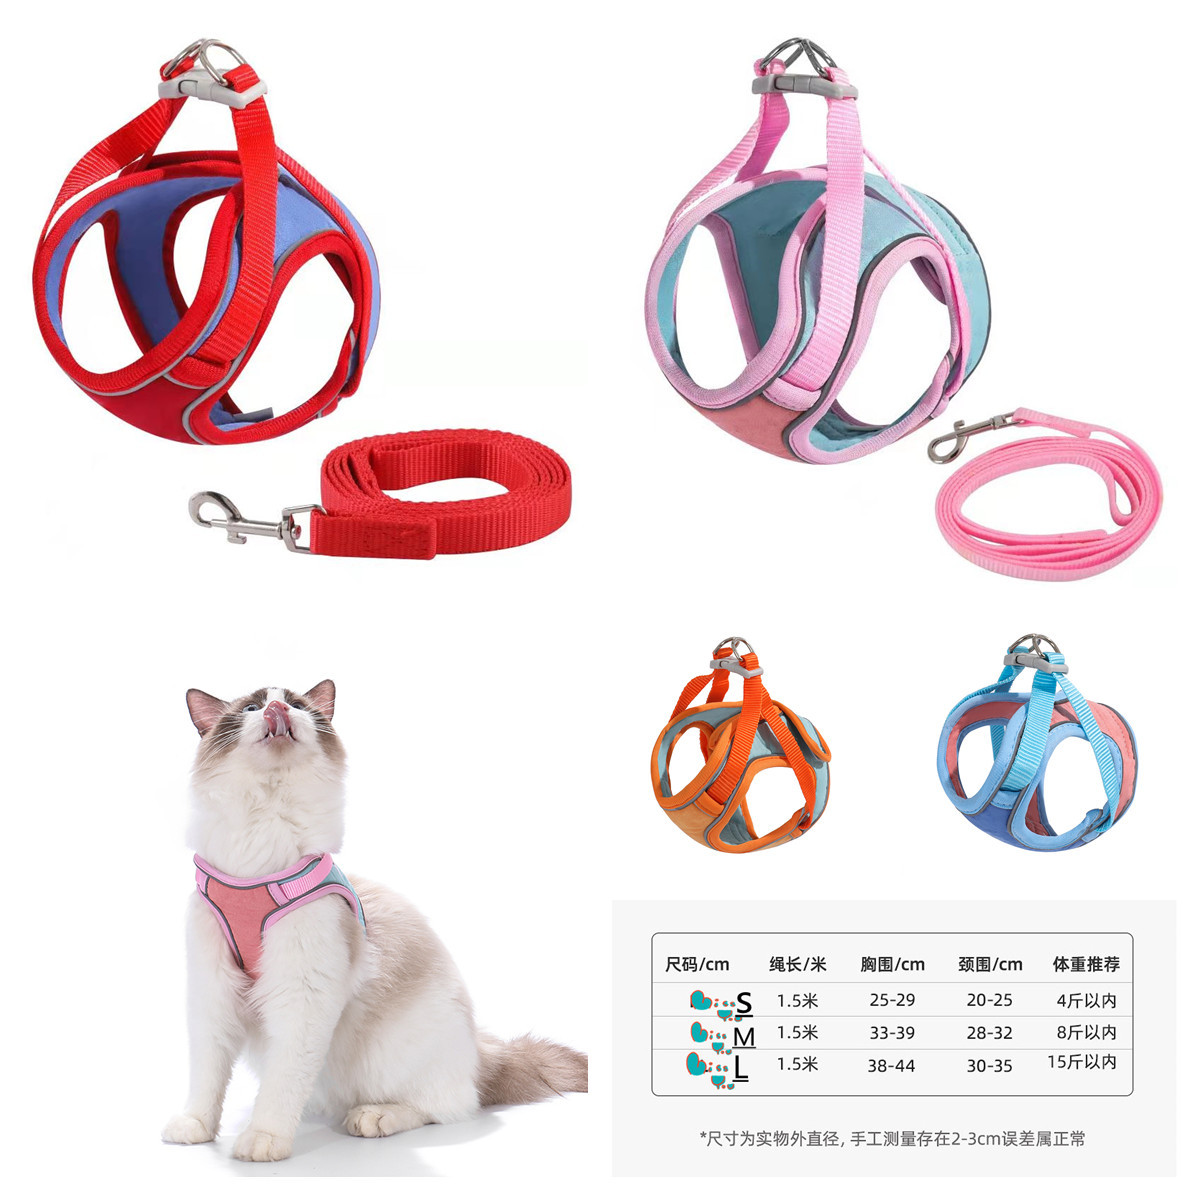 Hot Selling for Yiwu Product Sourcing - Breathable Pet Chest Harness Reflective Vest Dog Leash Rope Wholesale – Sellers Union